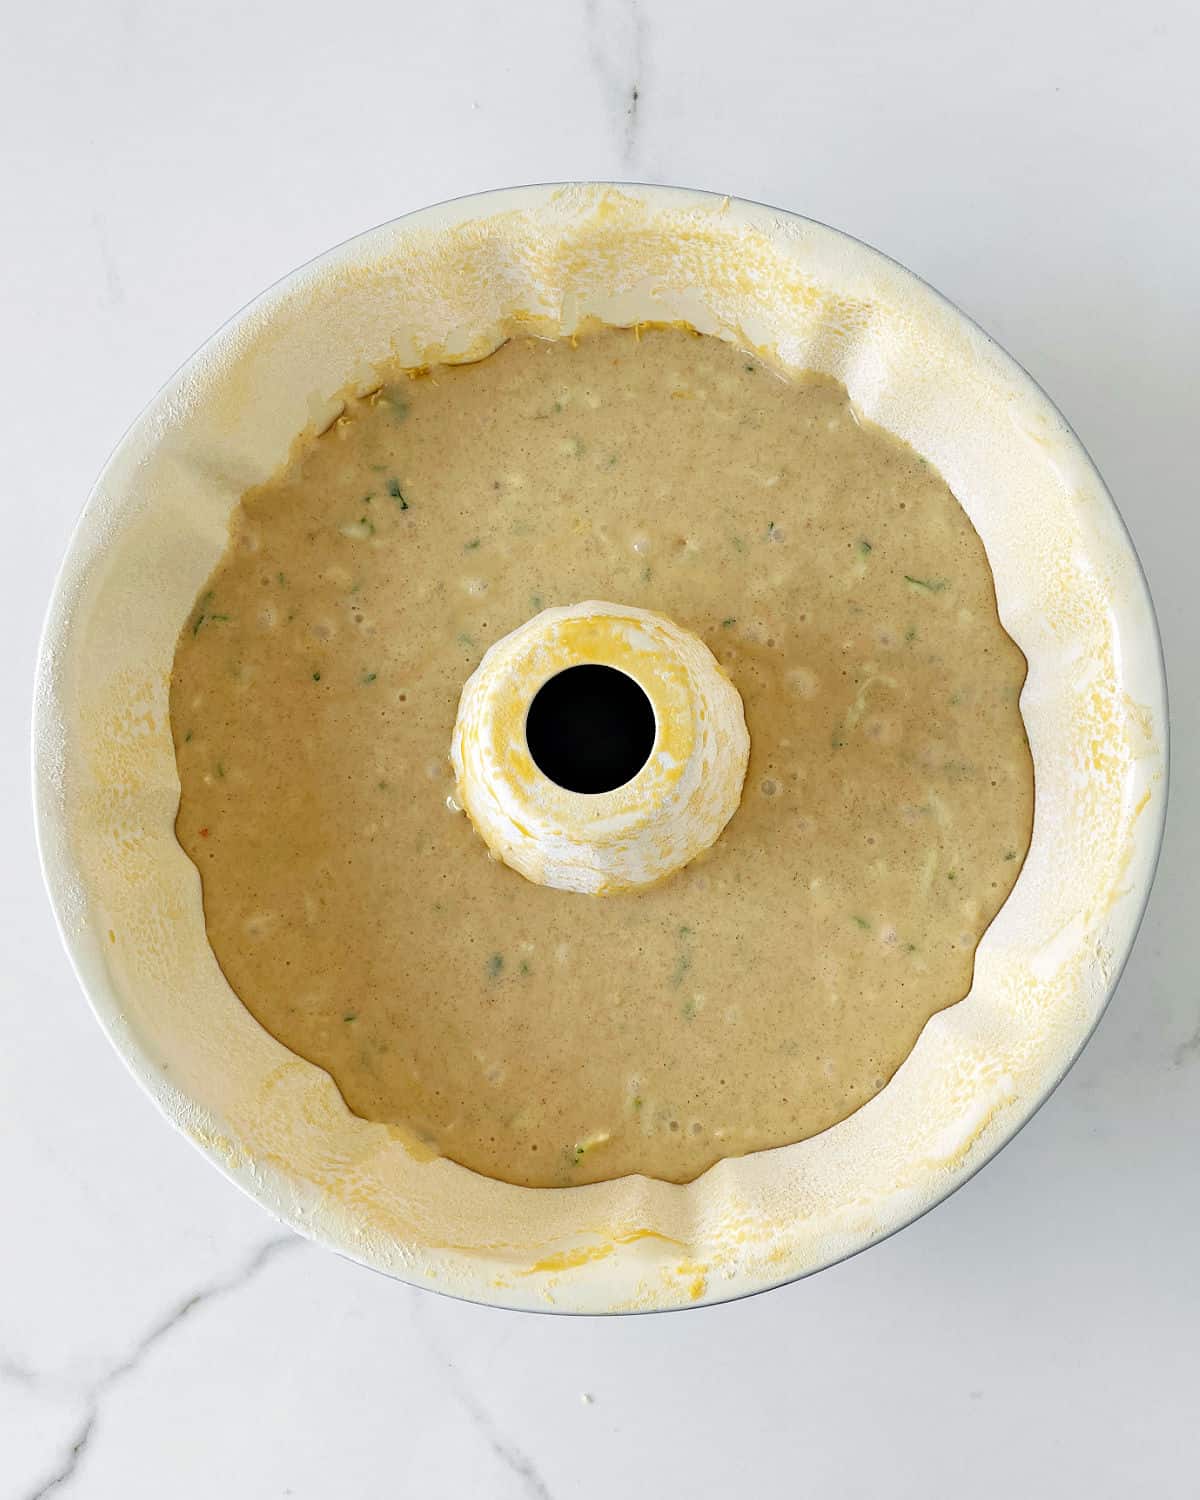 Cream-colored bundt pan with zucchini cake batter. White surface. Top view.